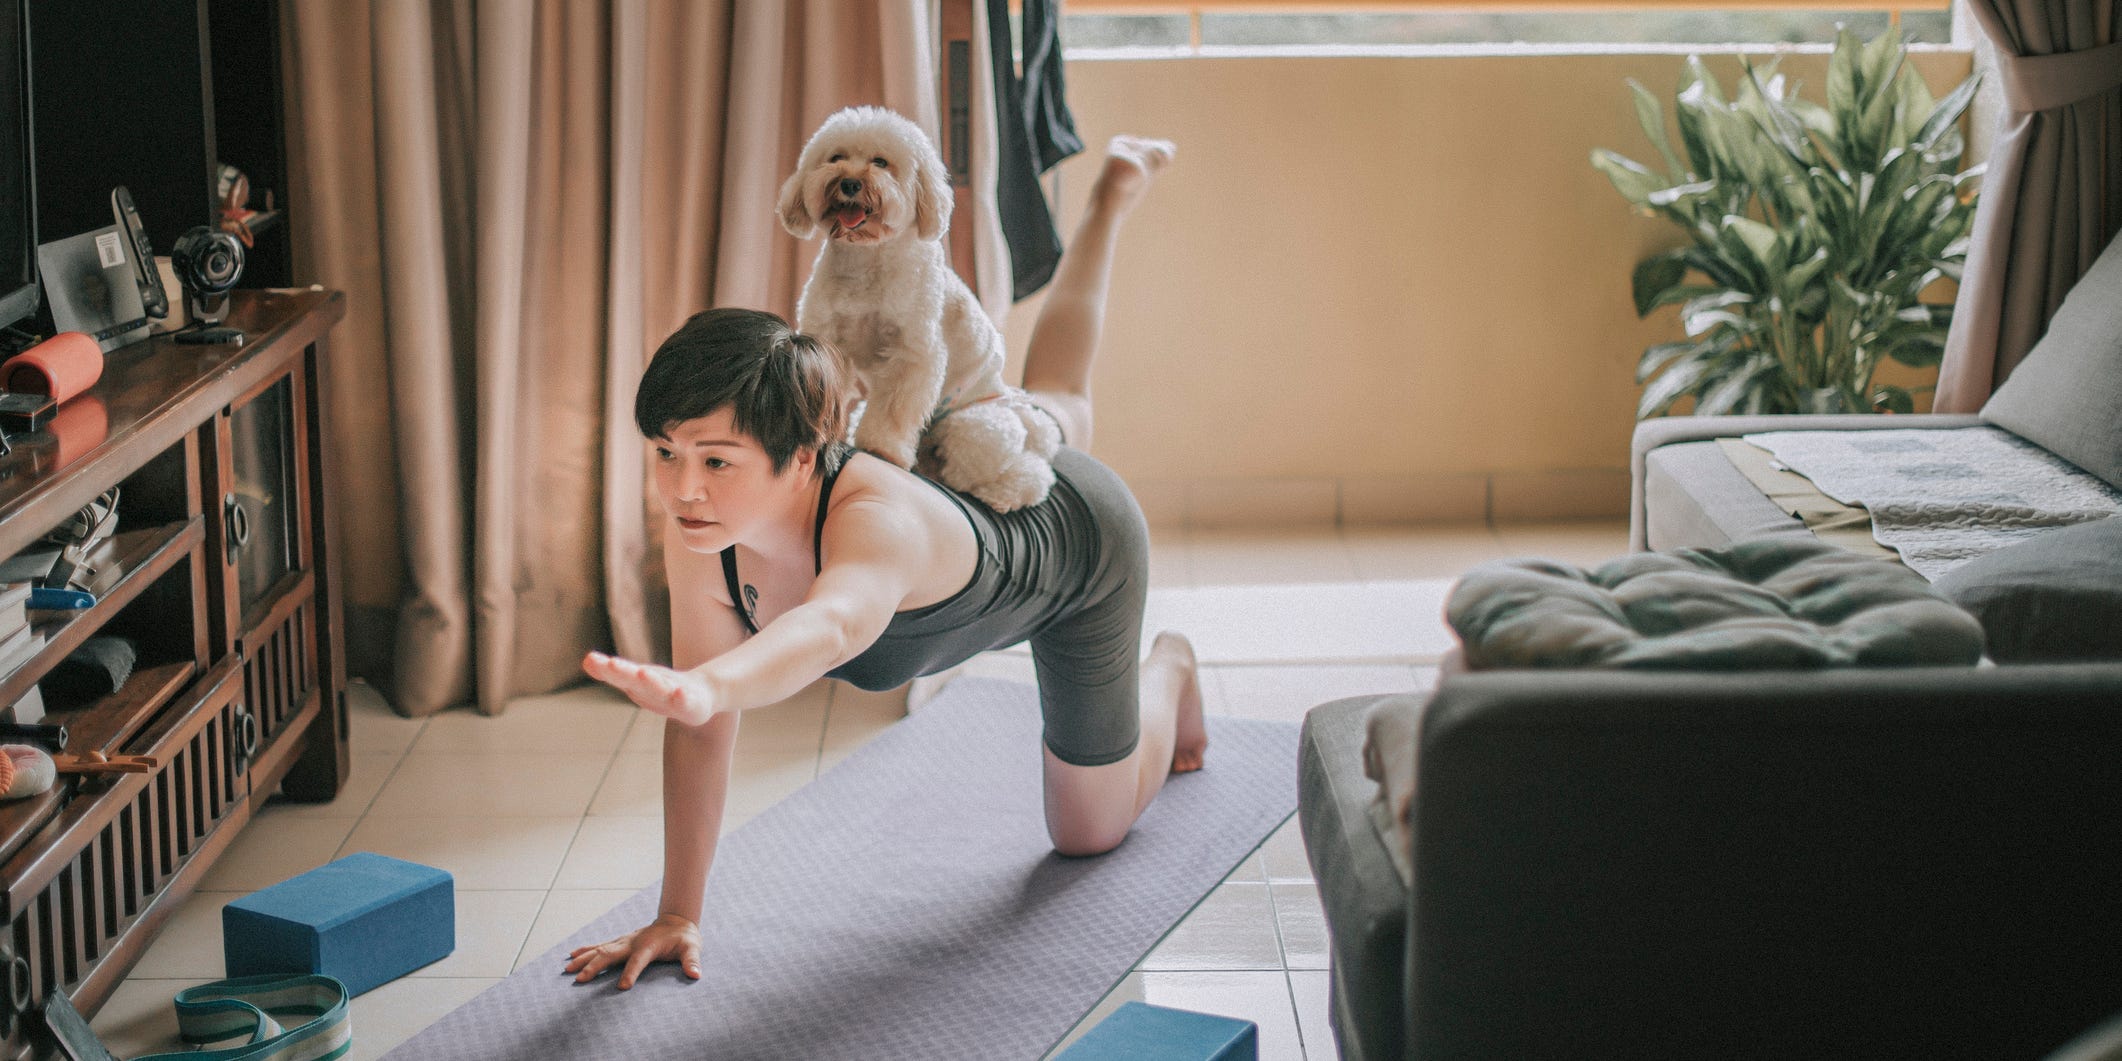 A woman does a bird dog exercise in her living room while her dog sits on top of her.